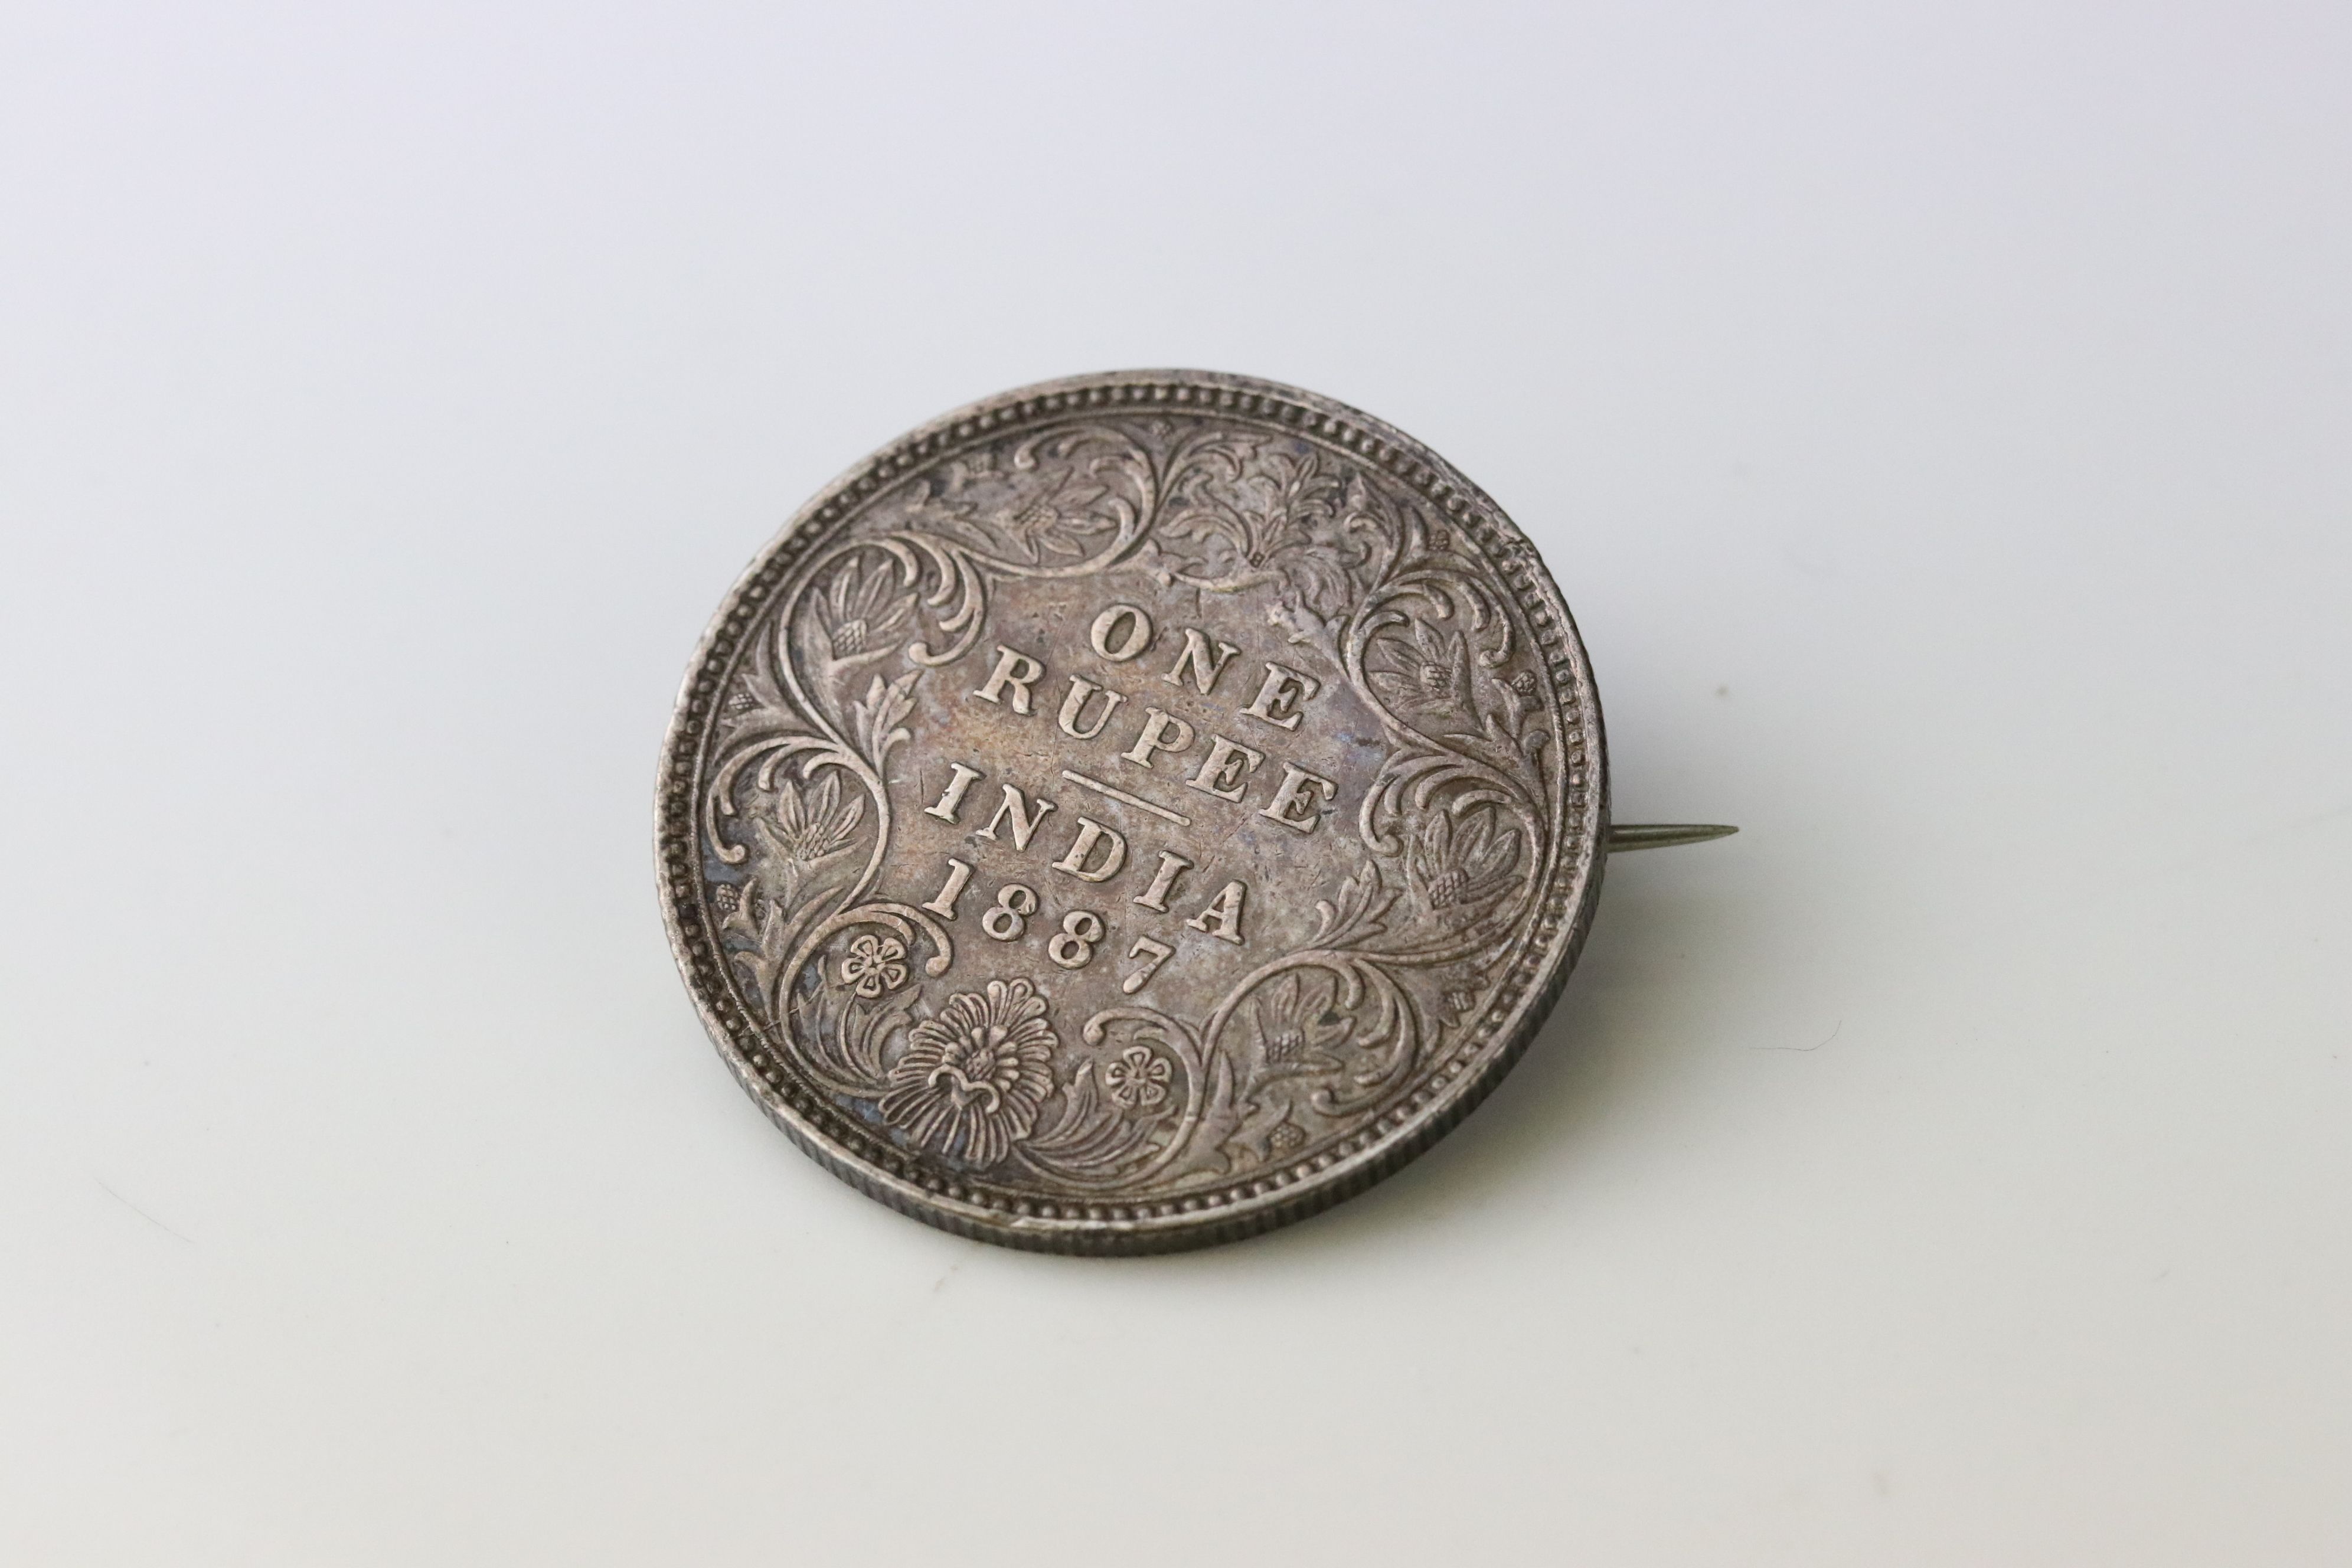 Collection of Victorian brooches to include yellow metal brooch, silver oval brooch with floral - Image 7 of 7